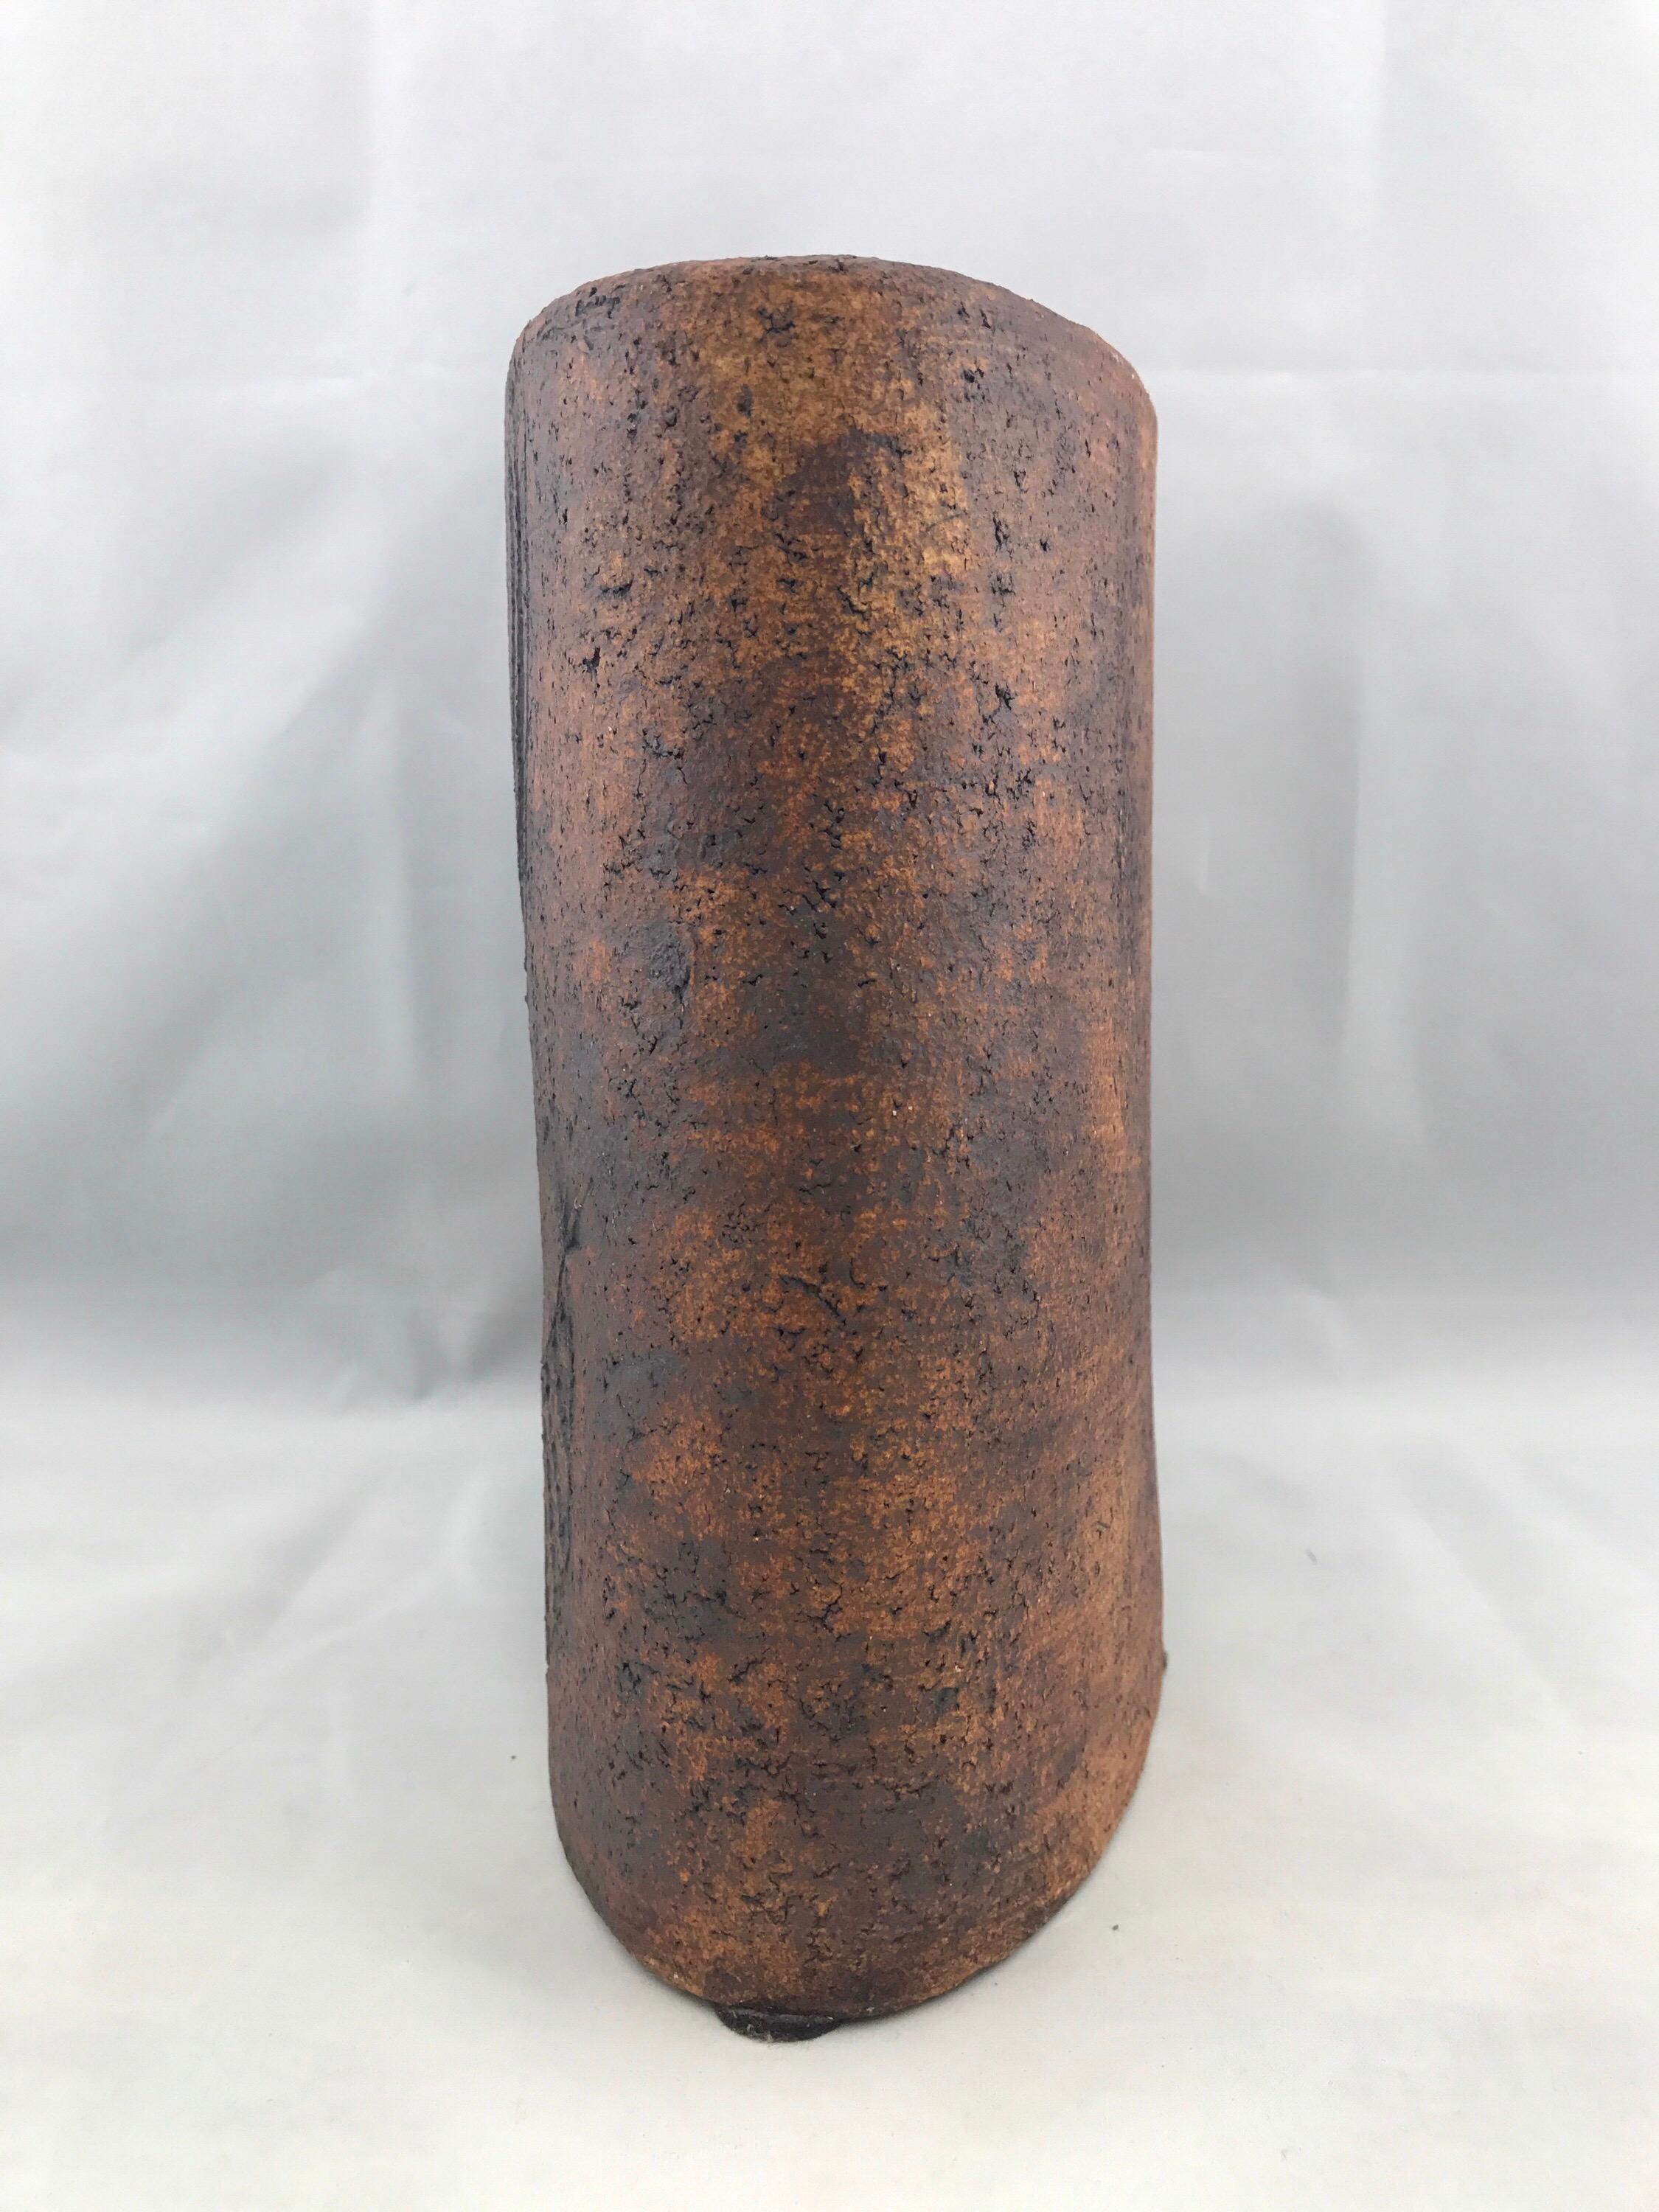 Midcentury French Ceramic Vase by Roger Capron, Vallauris 1